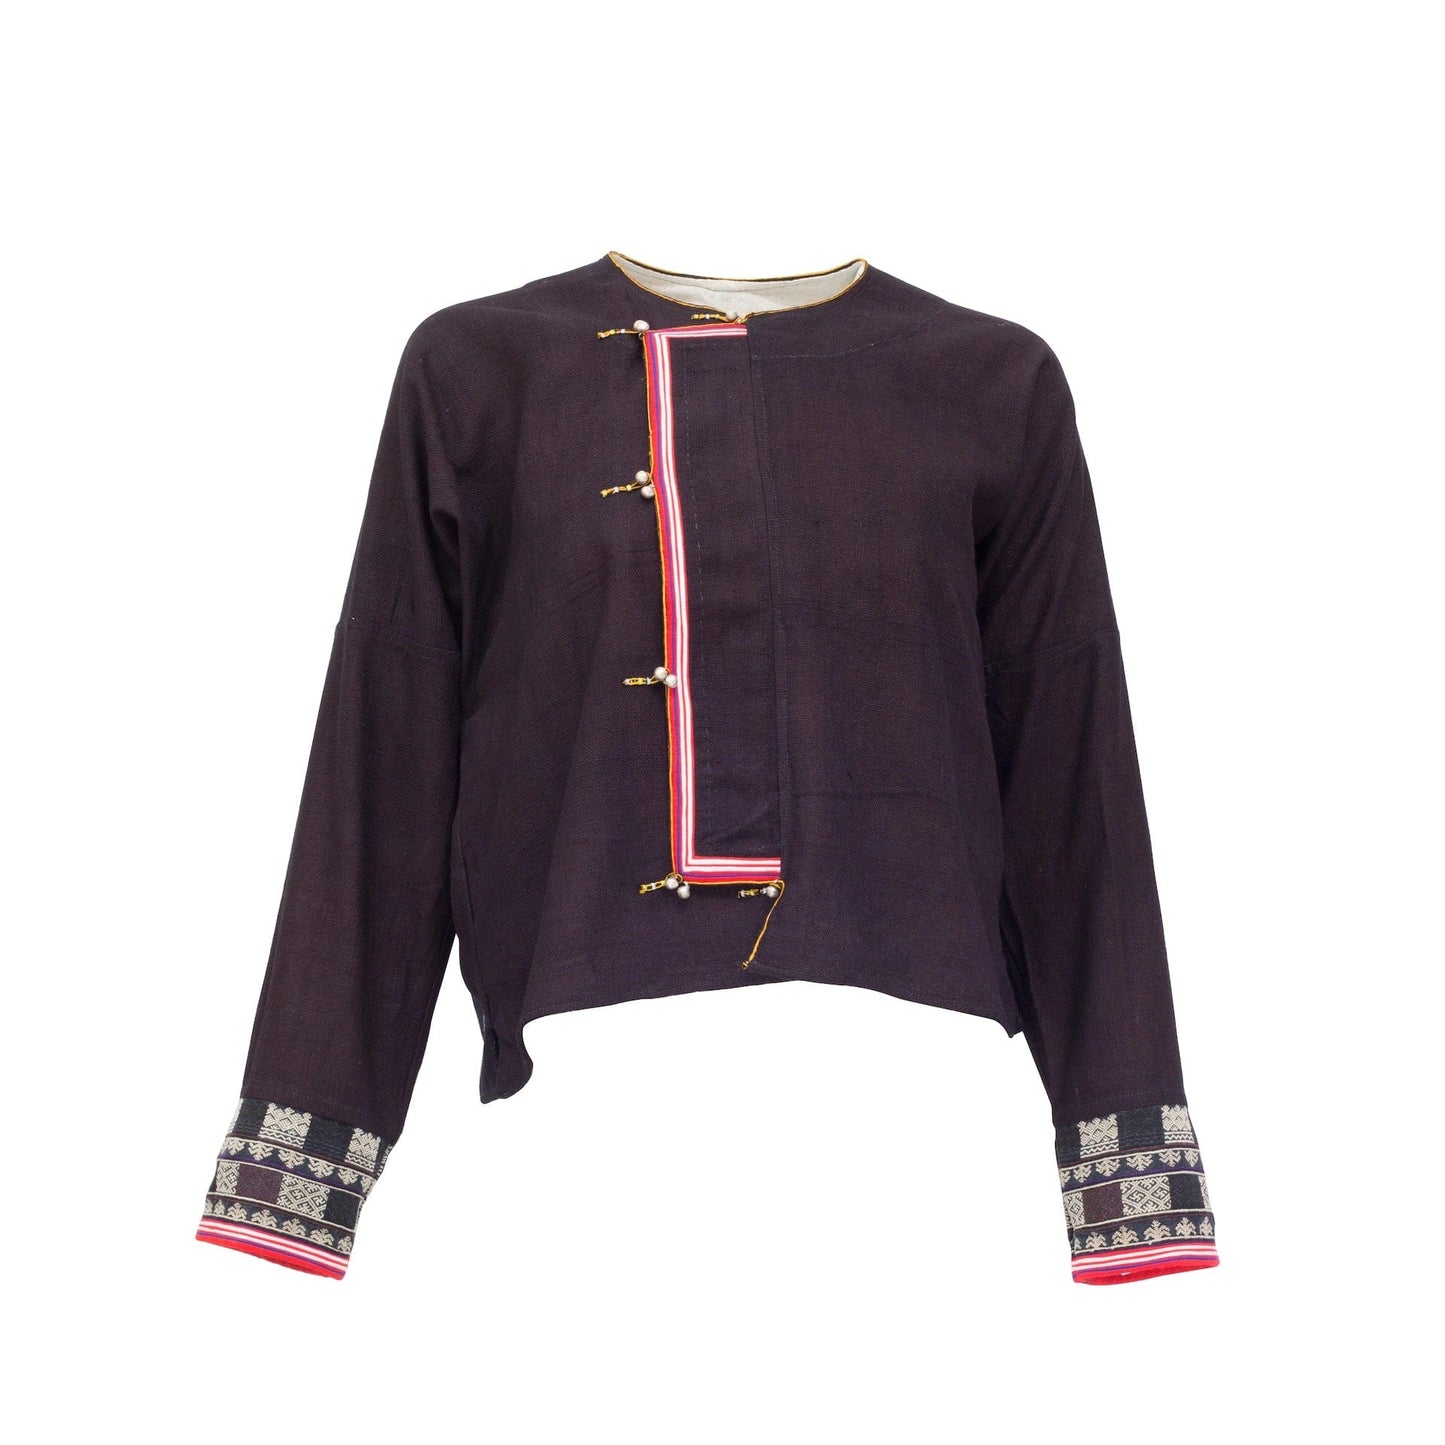 Tamay & Me 21 Dip Embroidered Jacket